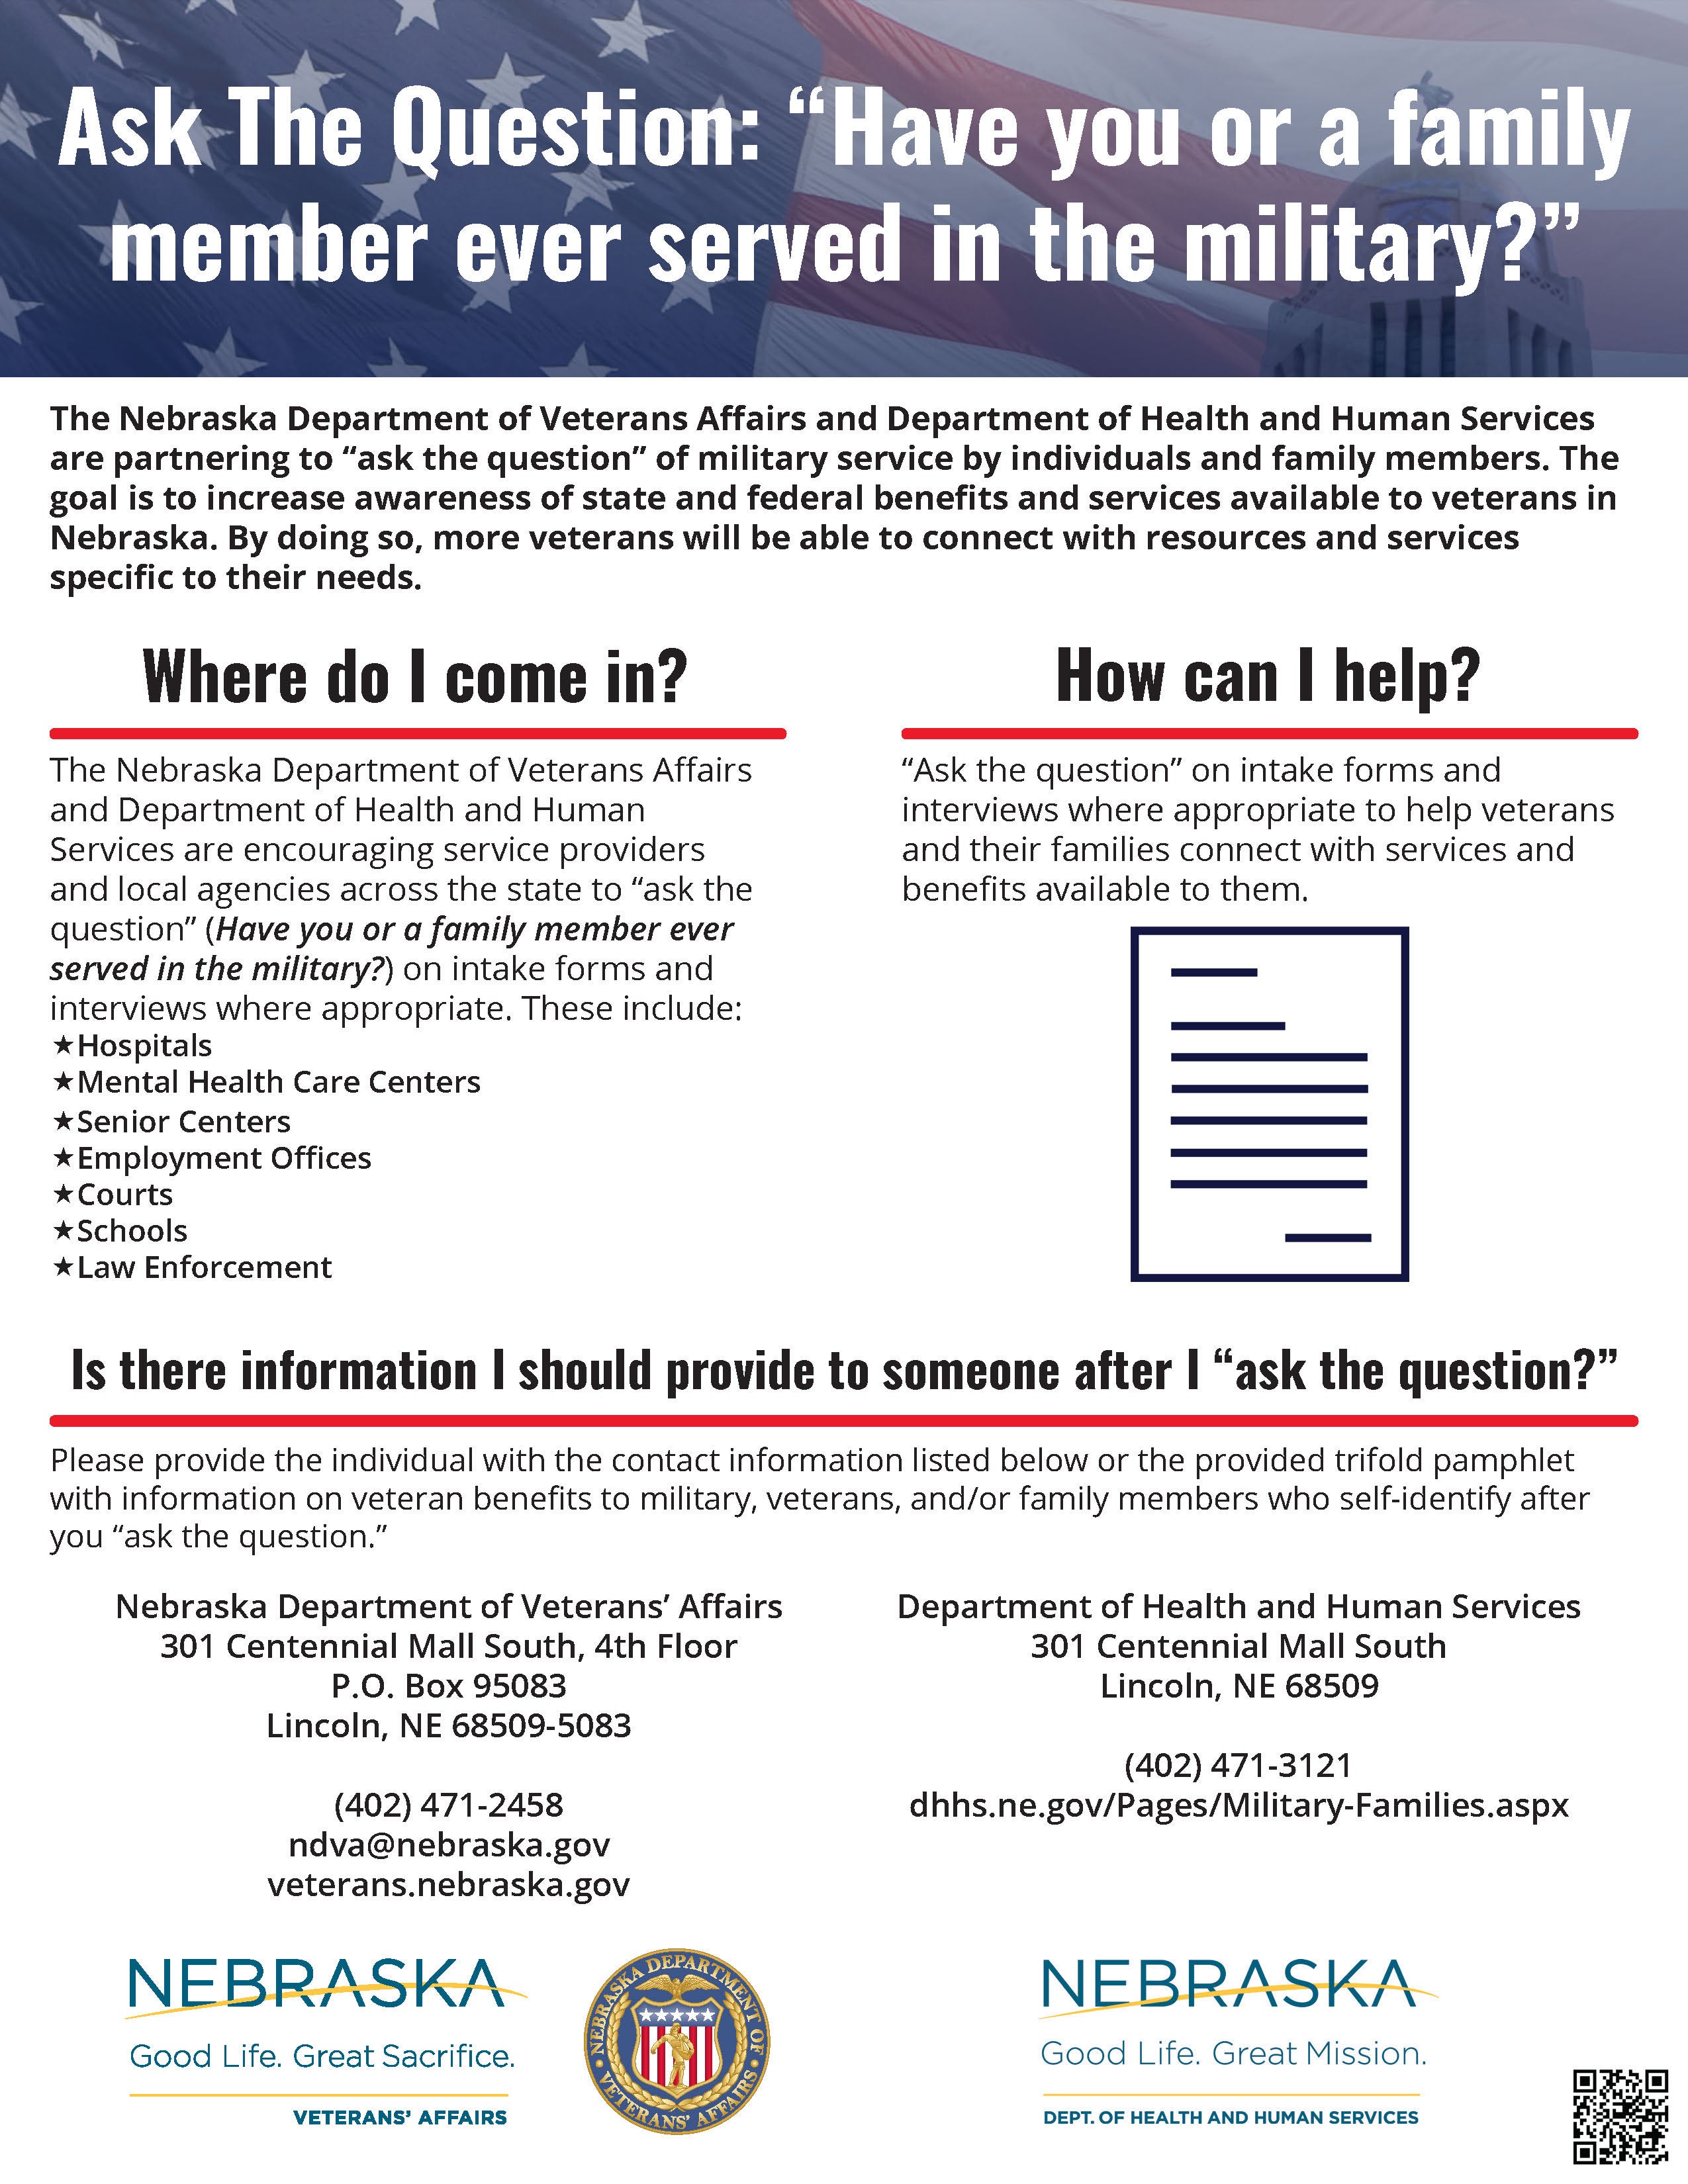 Flyer for the Ask The Question campaign